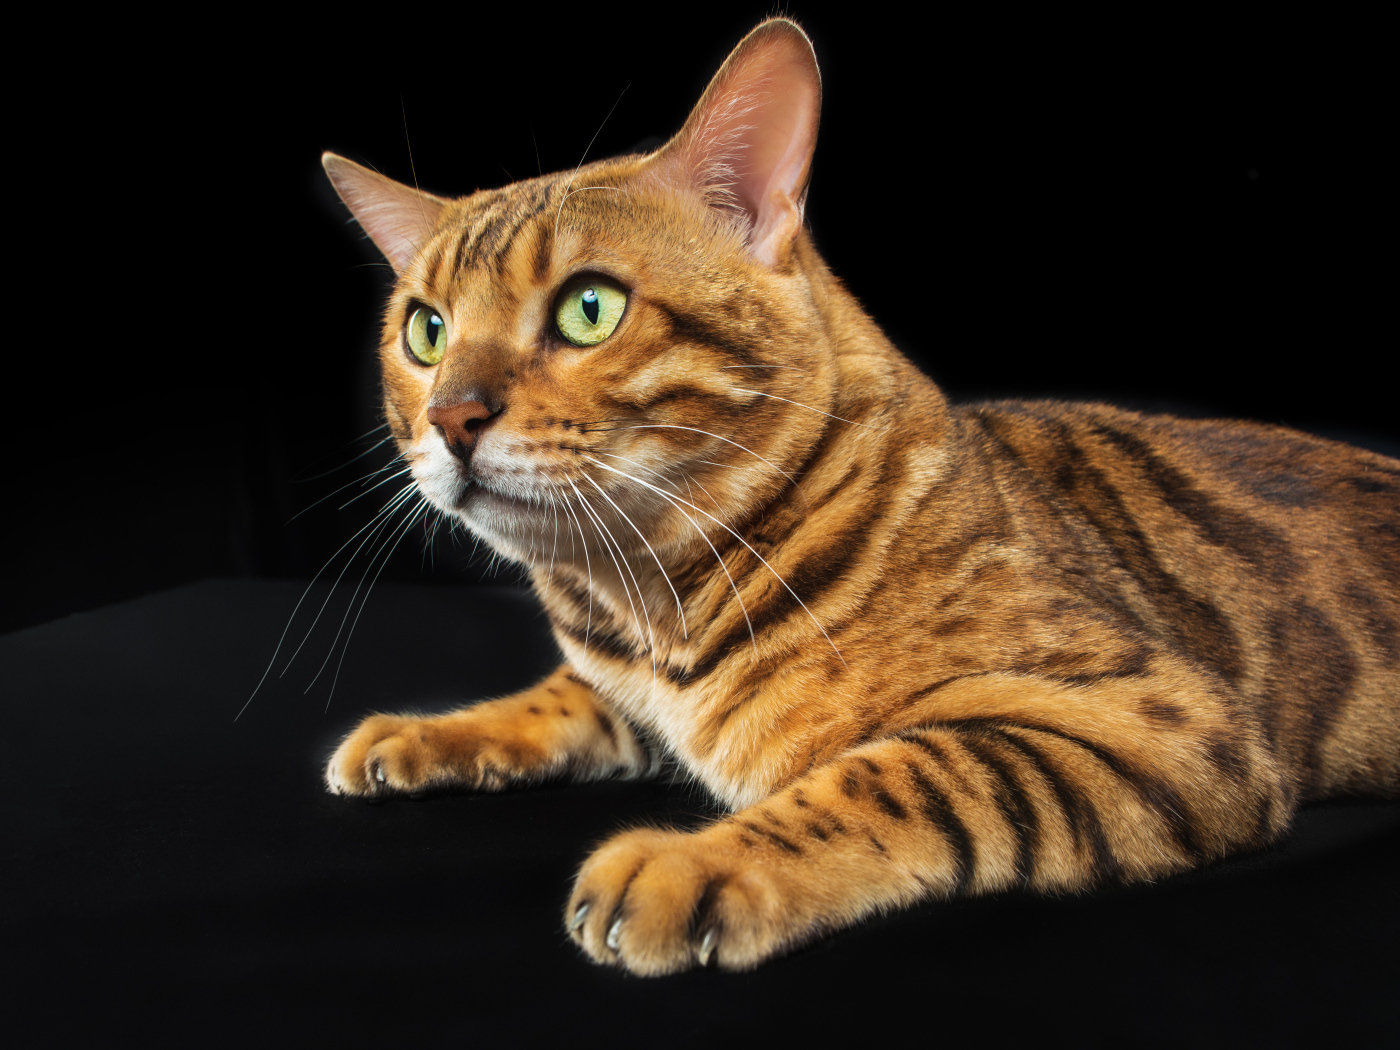 Bengal cat with green eyes on a black background